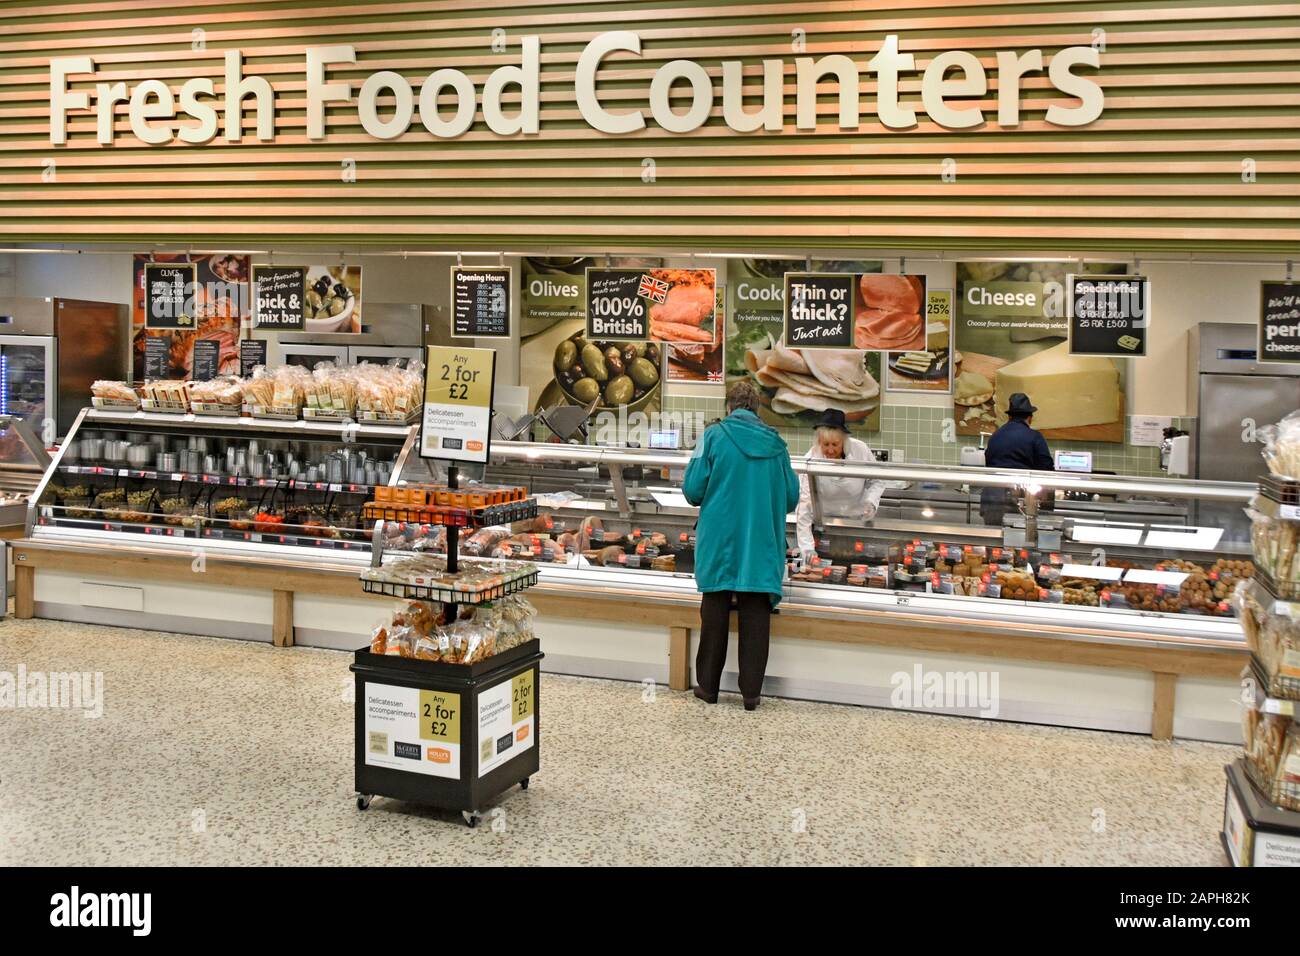 Tesco Extra supermarket store interior Fresh Food Counter back view woman shopper customer being served meat products early morning London England UK Stock Photo